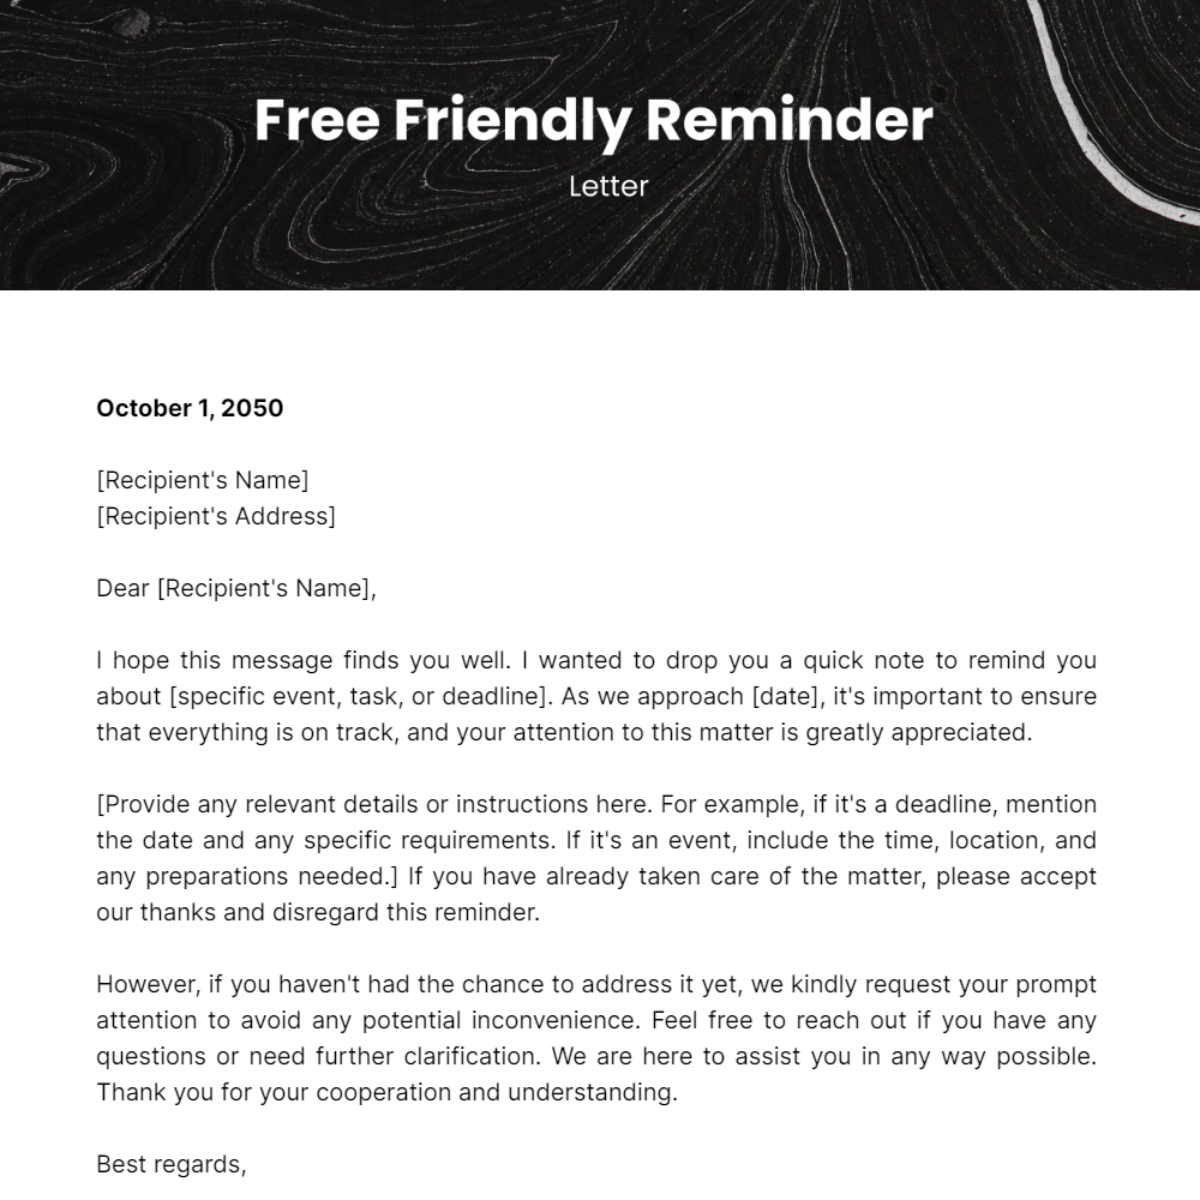 Friendly Reminder Letter Template